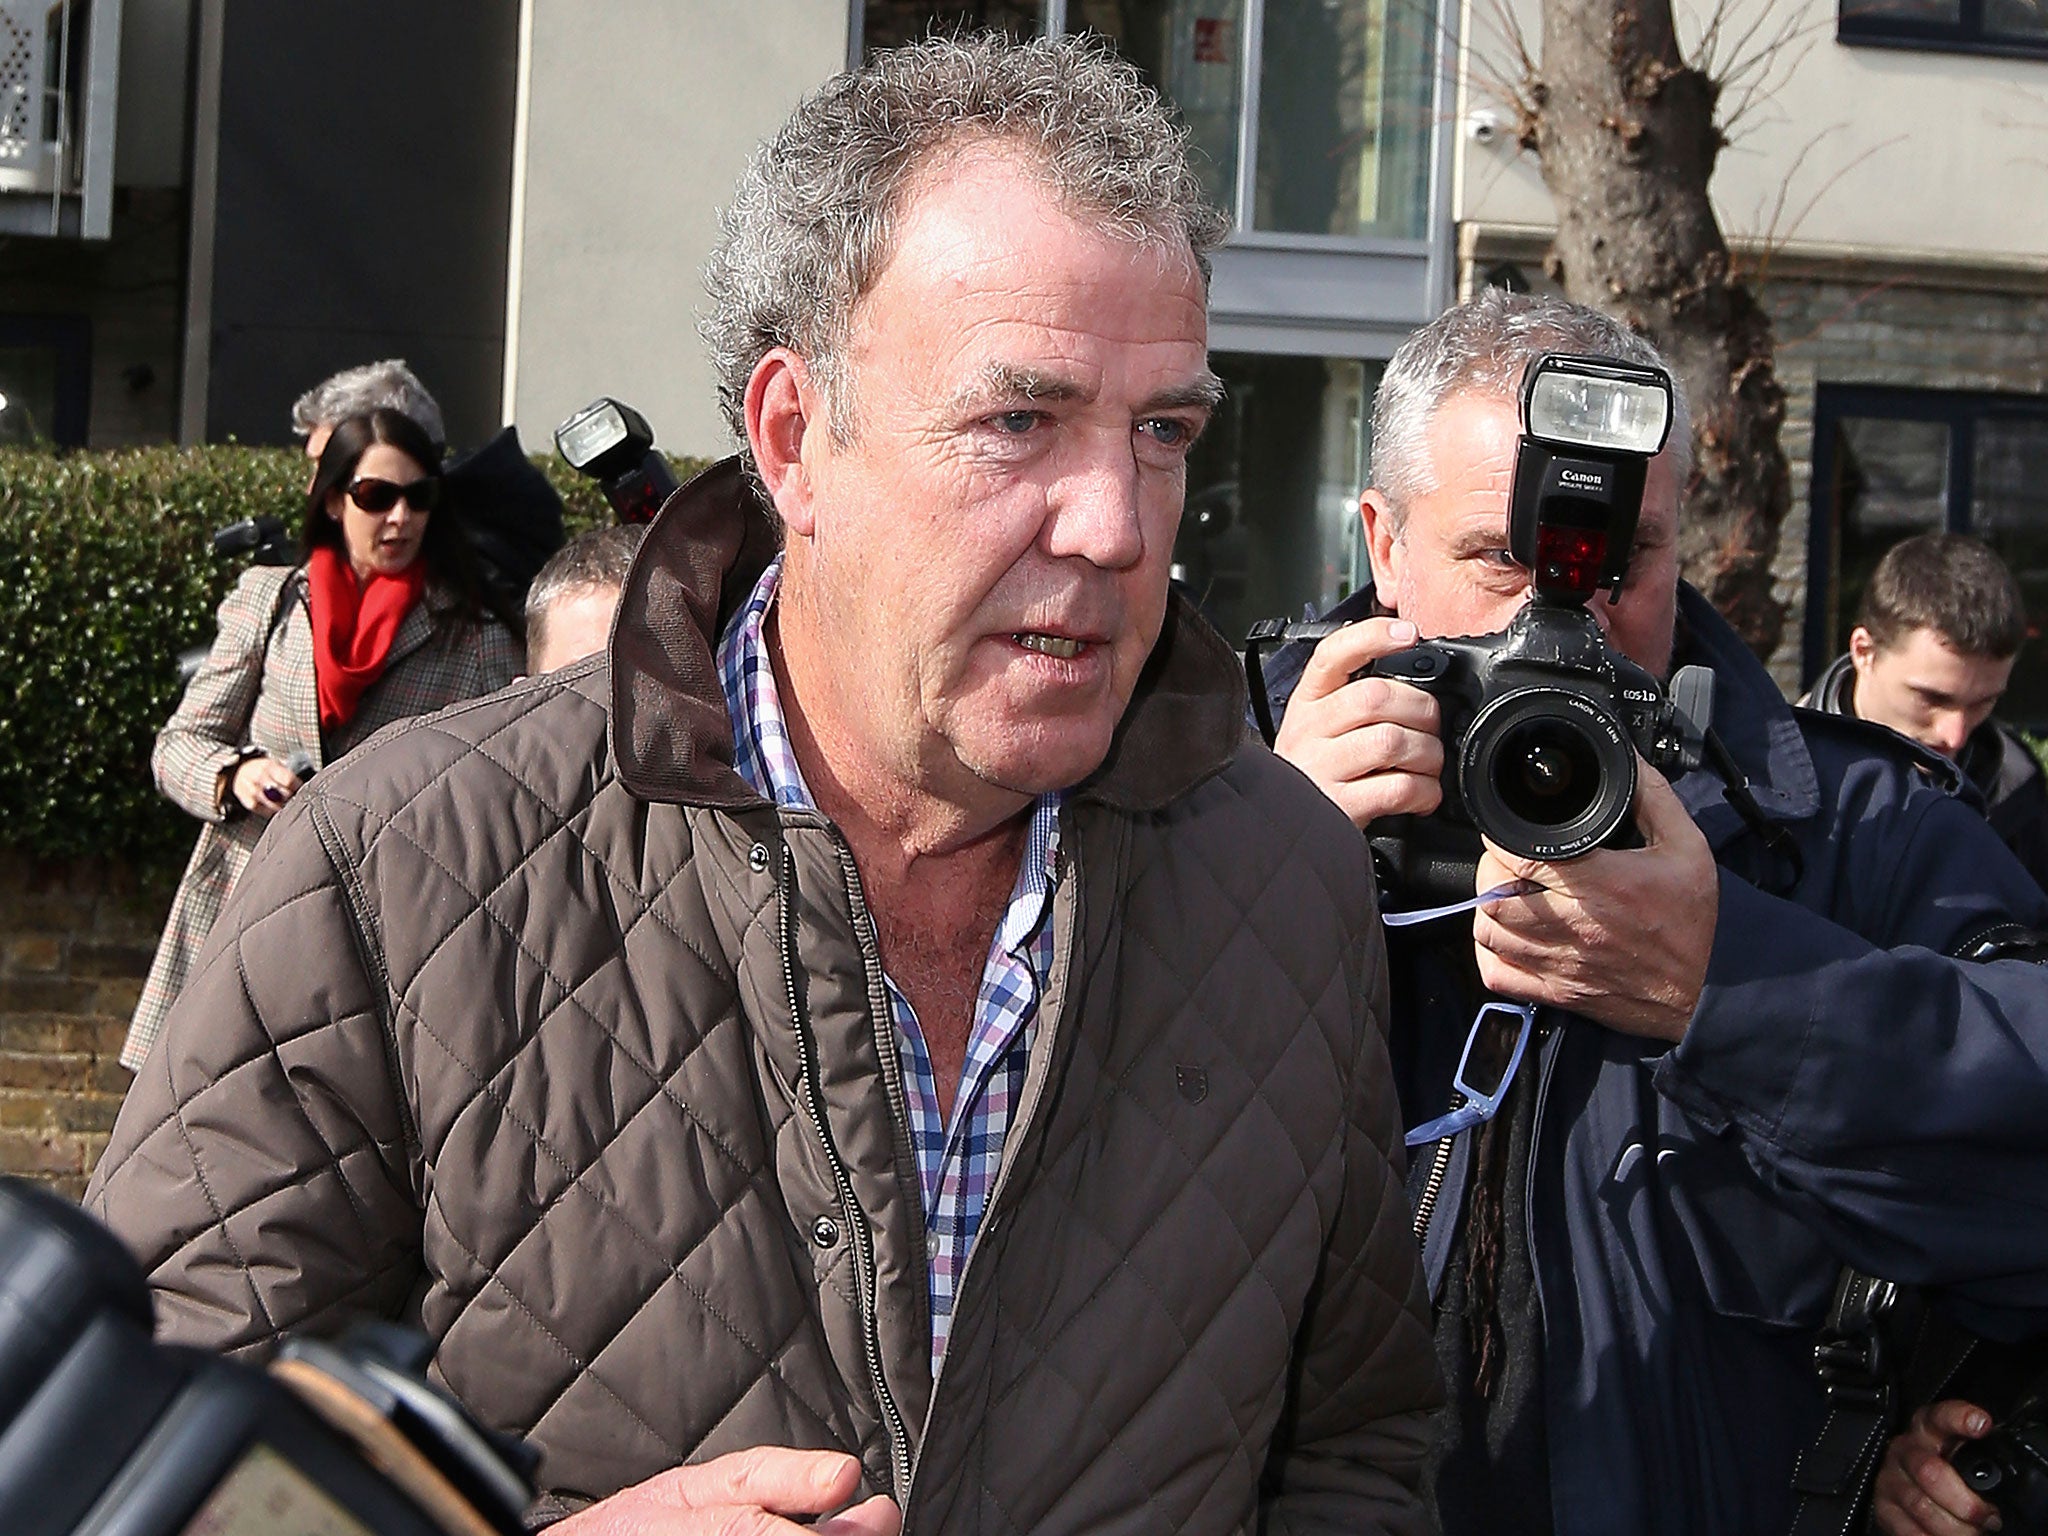 Jeremy Clarkson leaves his home in London following his suspension from Top Gear